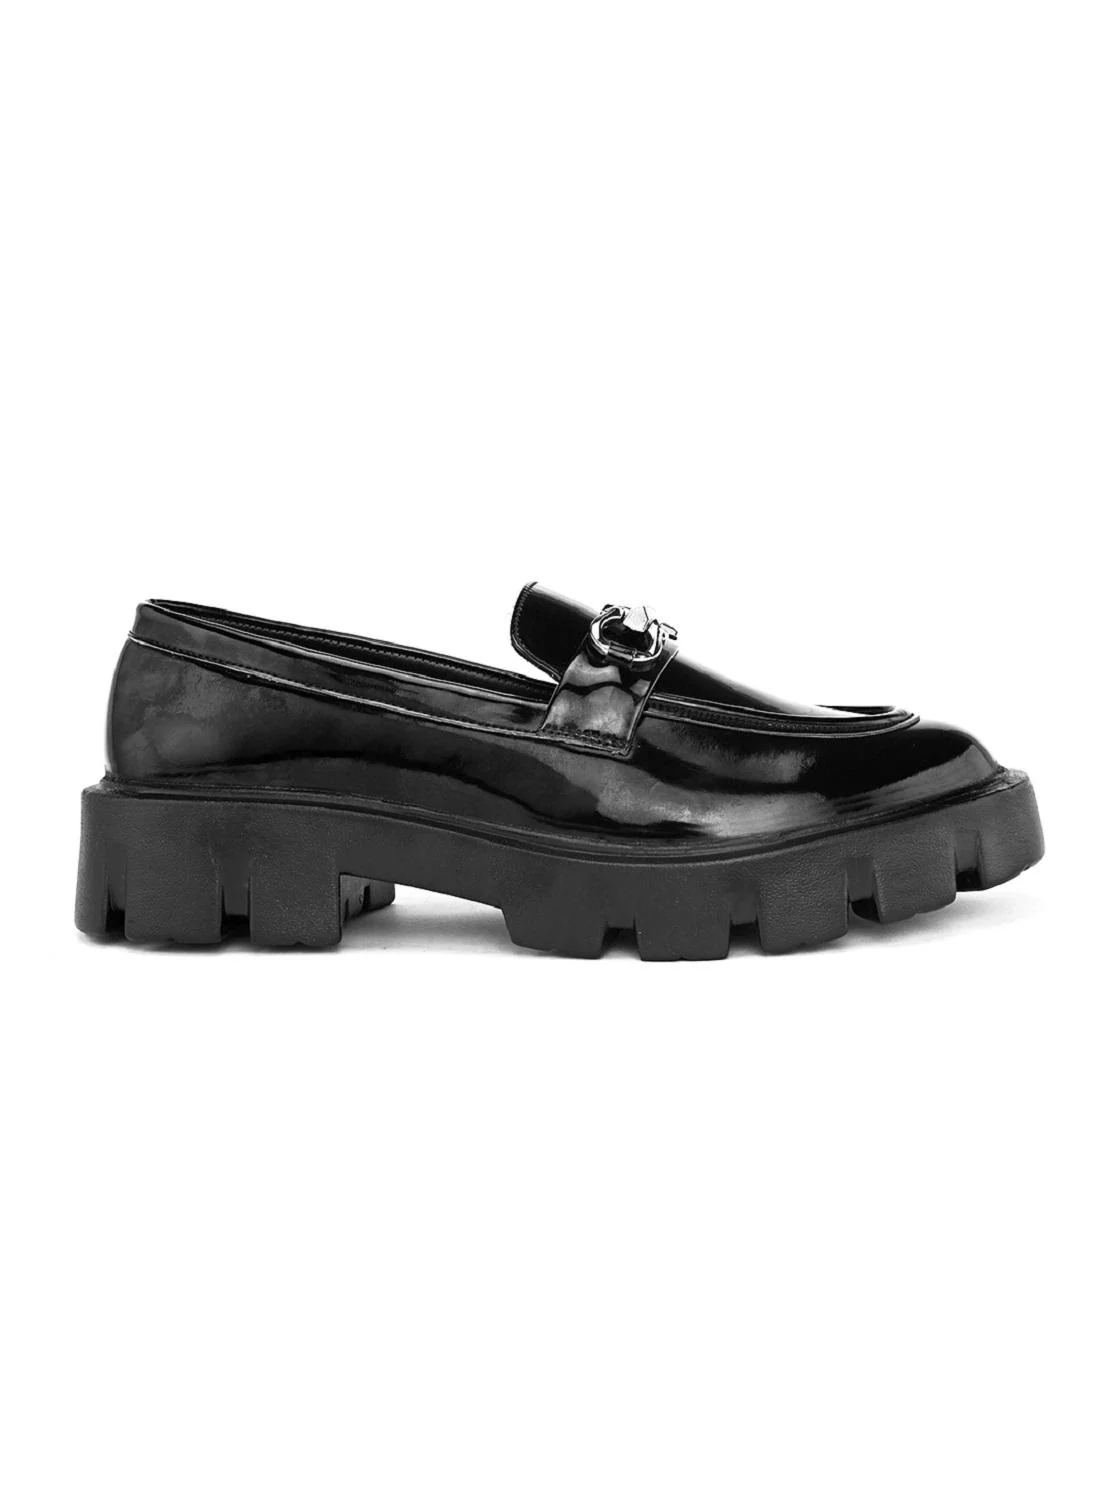 CARLO ROMANO SlipOn  Buy CARLO ROMANO Milled Leather Black Fancy Lace Up  Slip On Casual Shoes Online  Nykaa Fashion